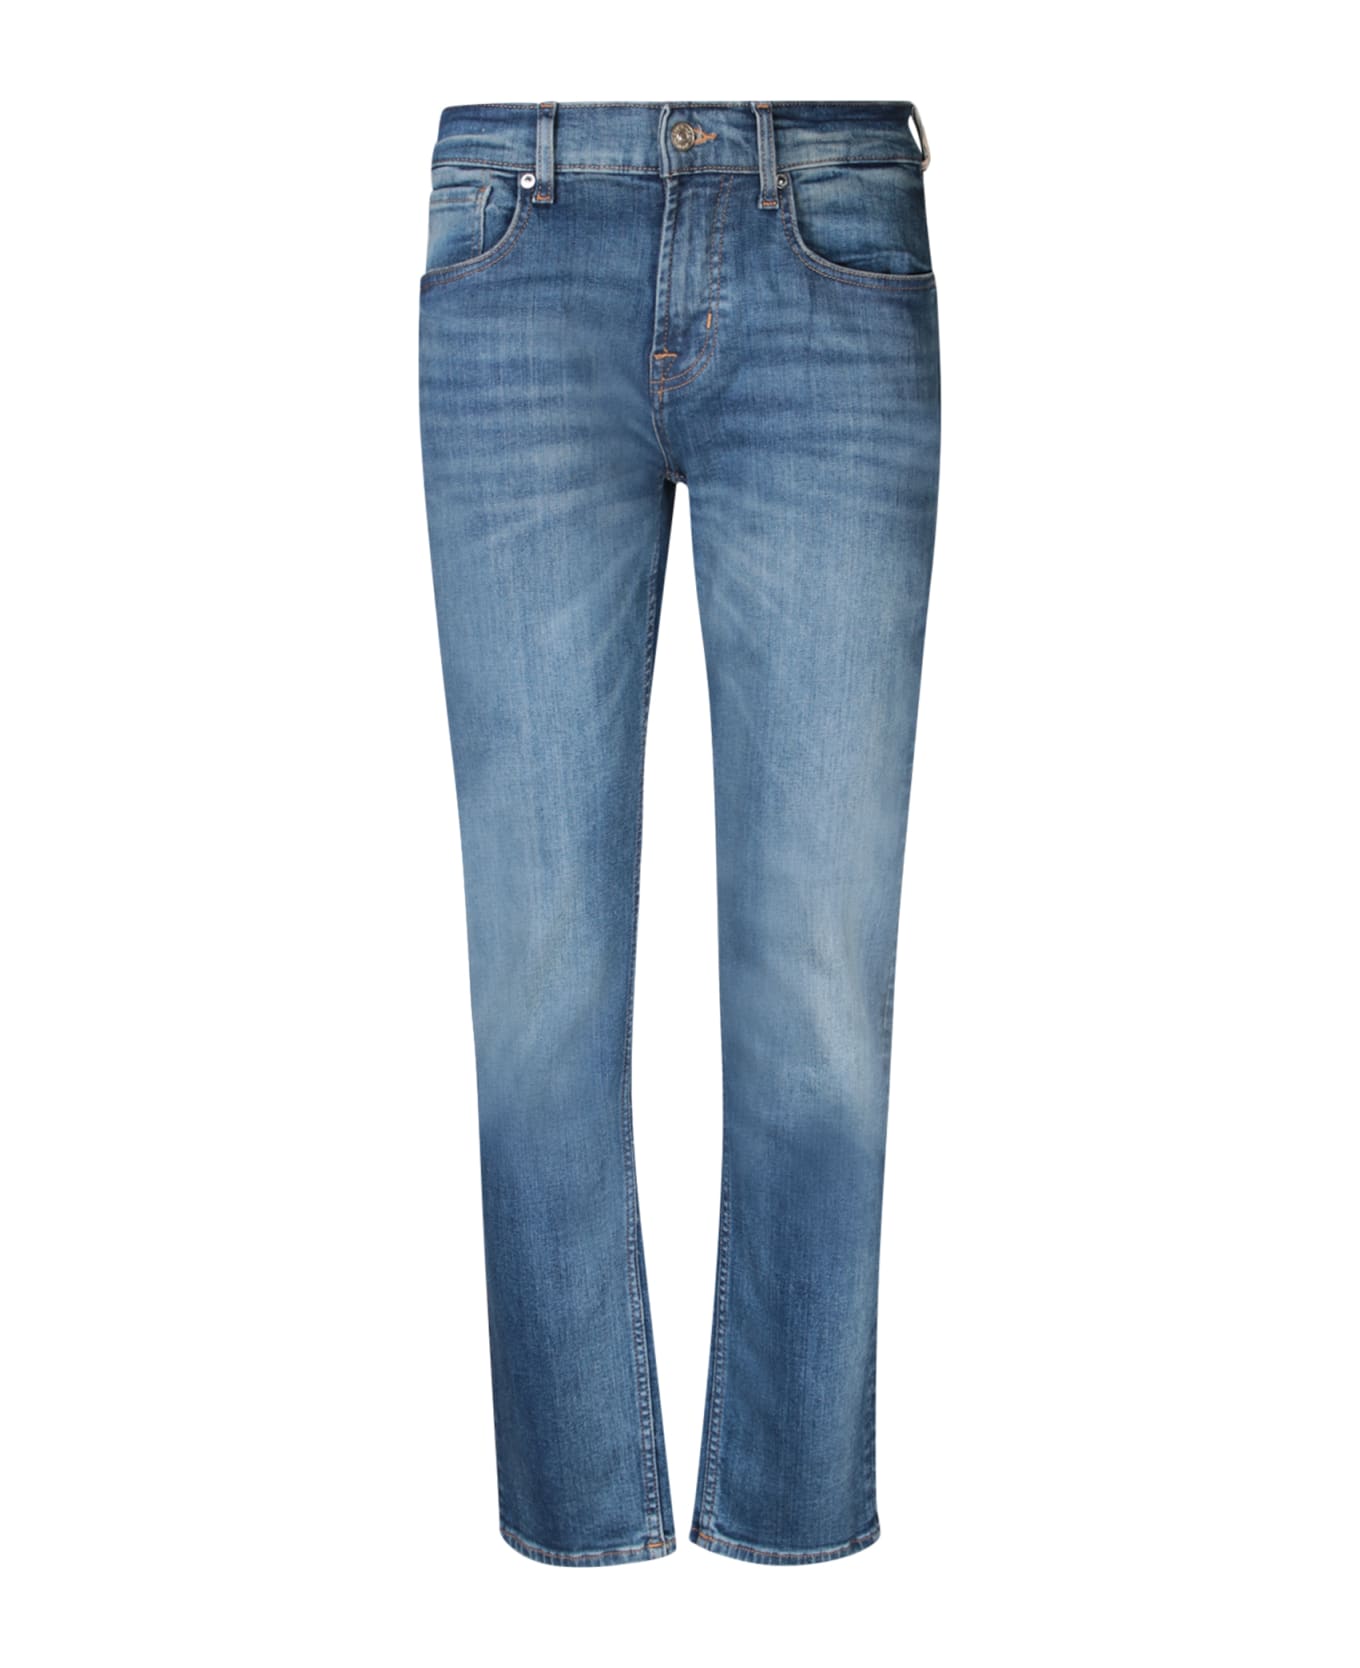 7 For All Mankind Slimmy Tapered Blue Jeans - Blue